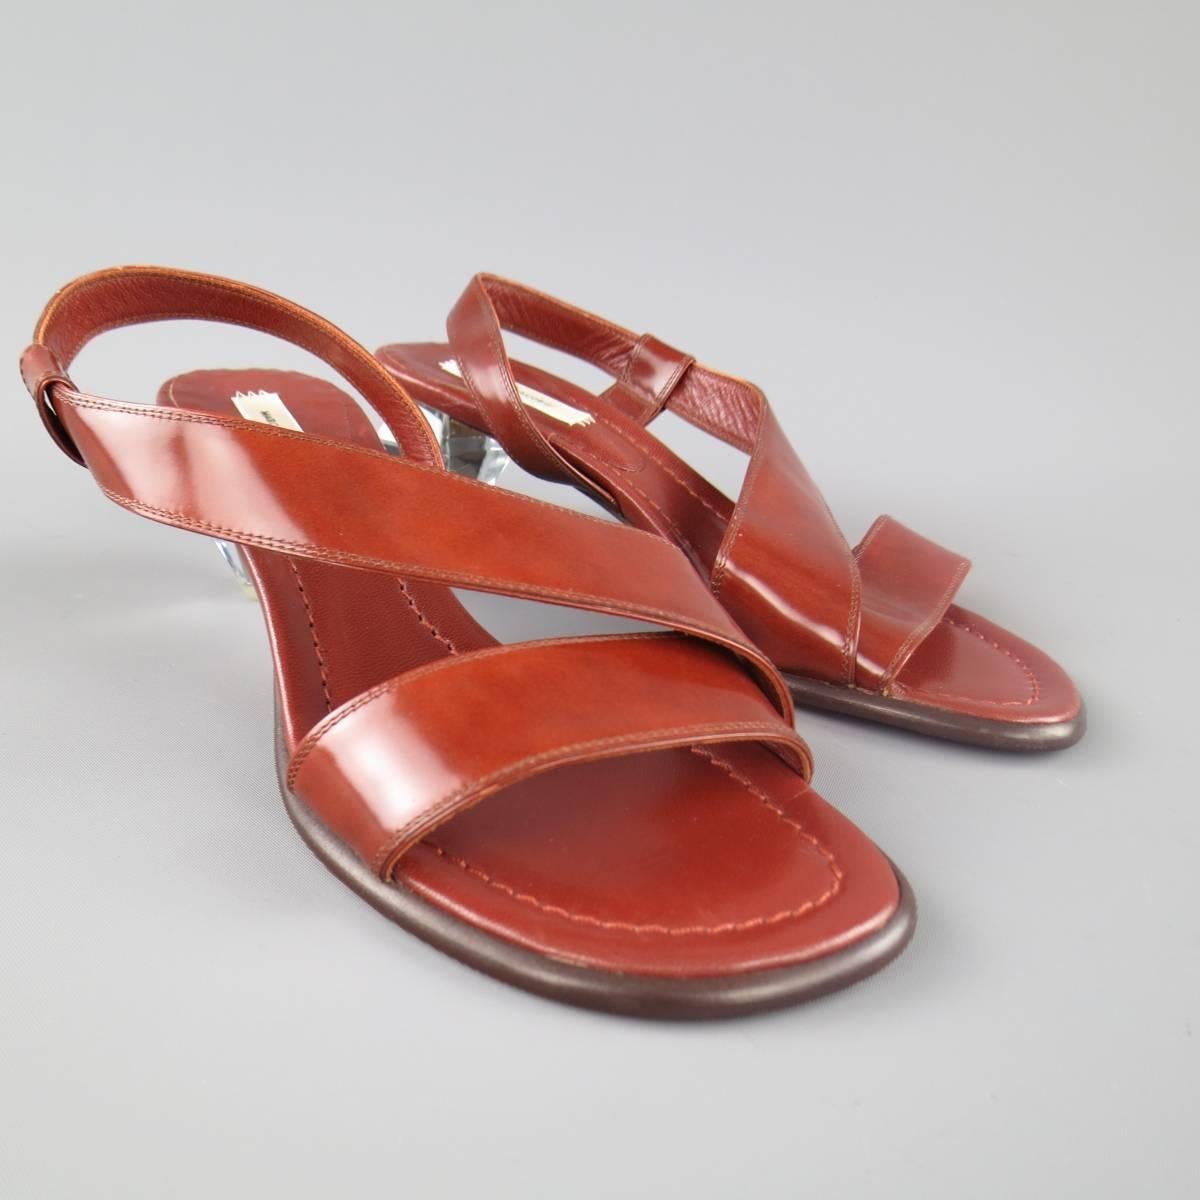 MARC JACOBS sandals in a tan leather featuring a diagonal strap and oversized crystal diamond cut heel.  Made in Italy.
 
Never Worn.
Marked: IT 37
 
Heel: 2.5 in.


Web ID: 67828 